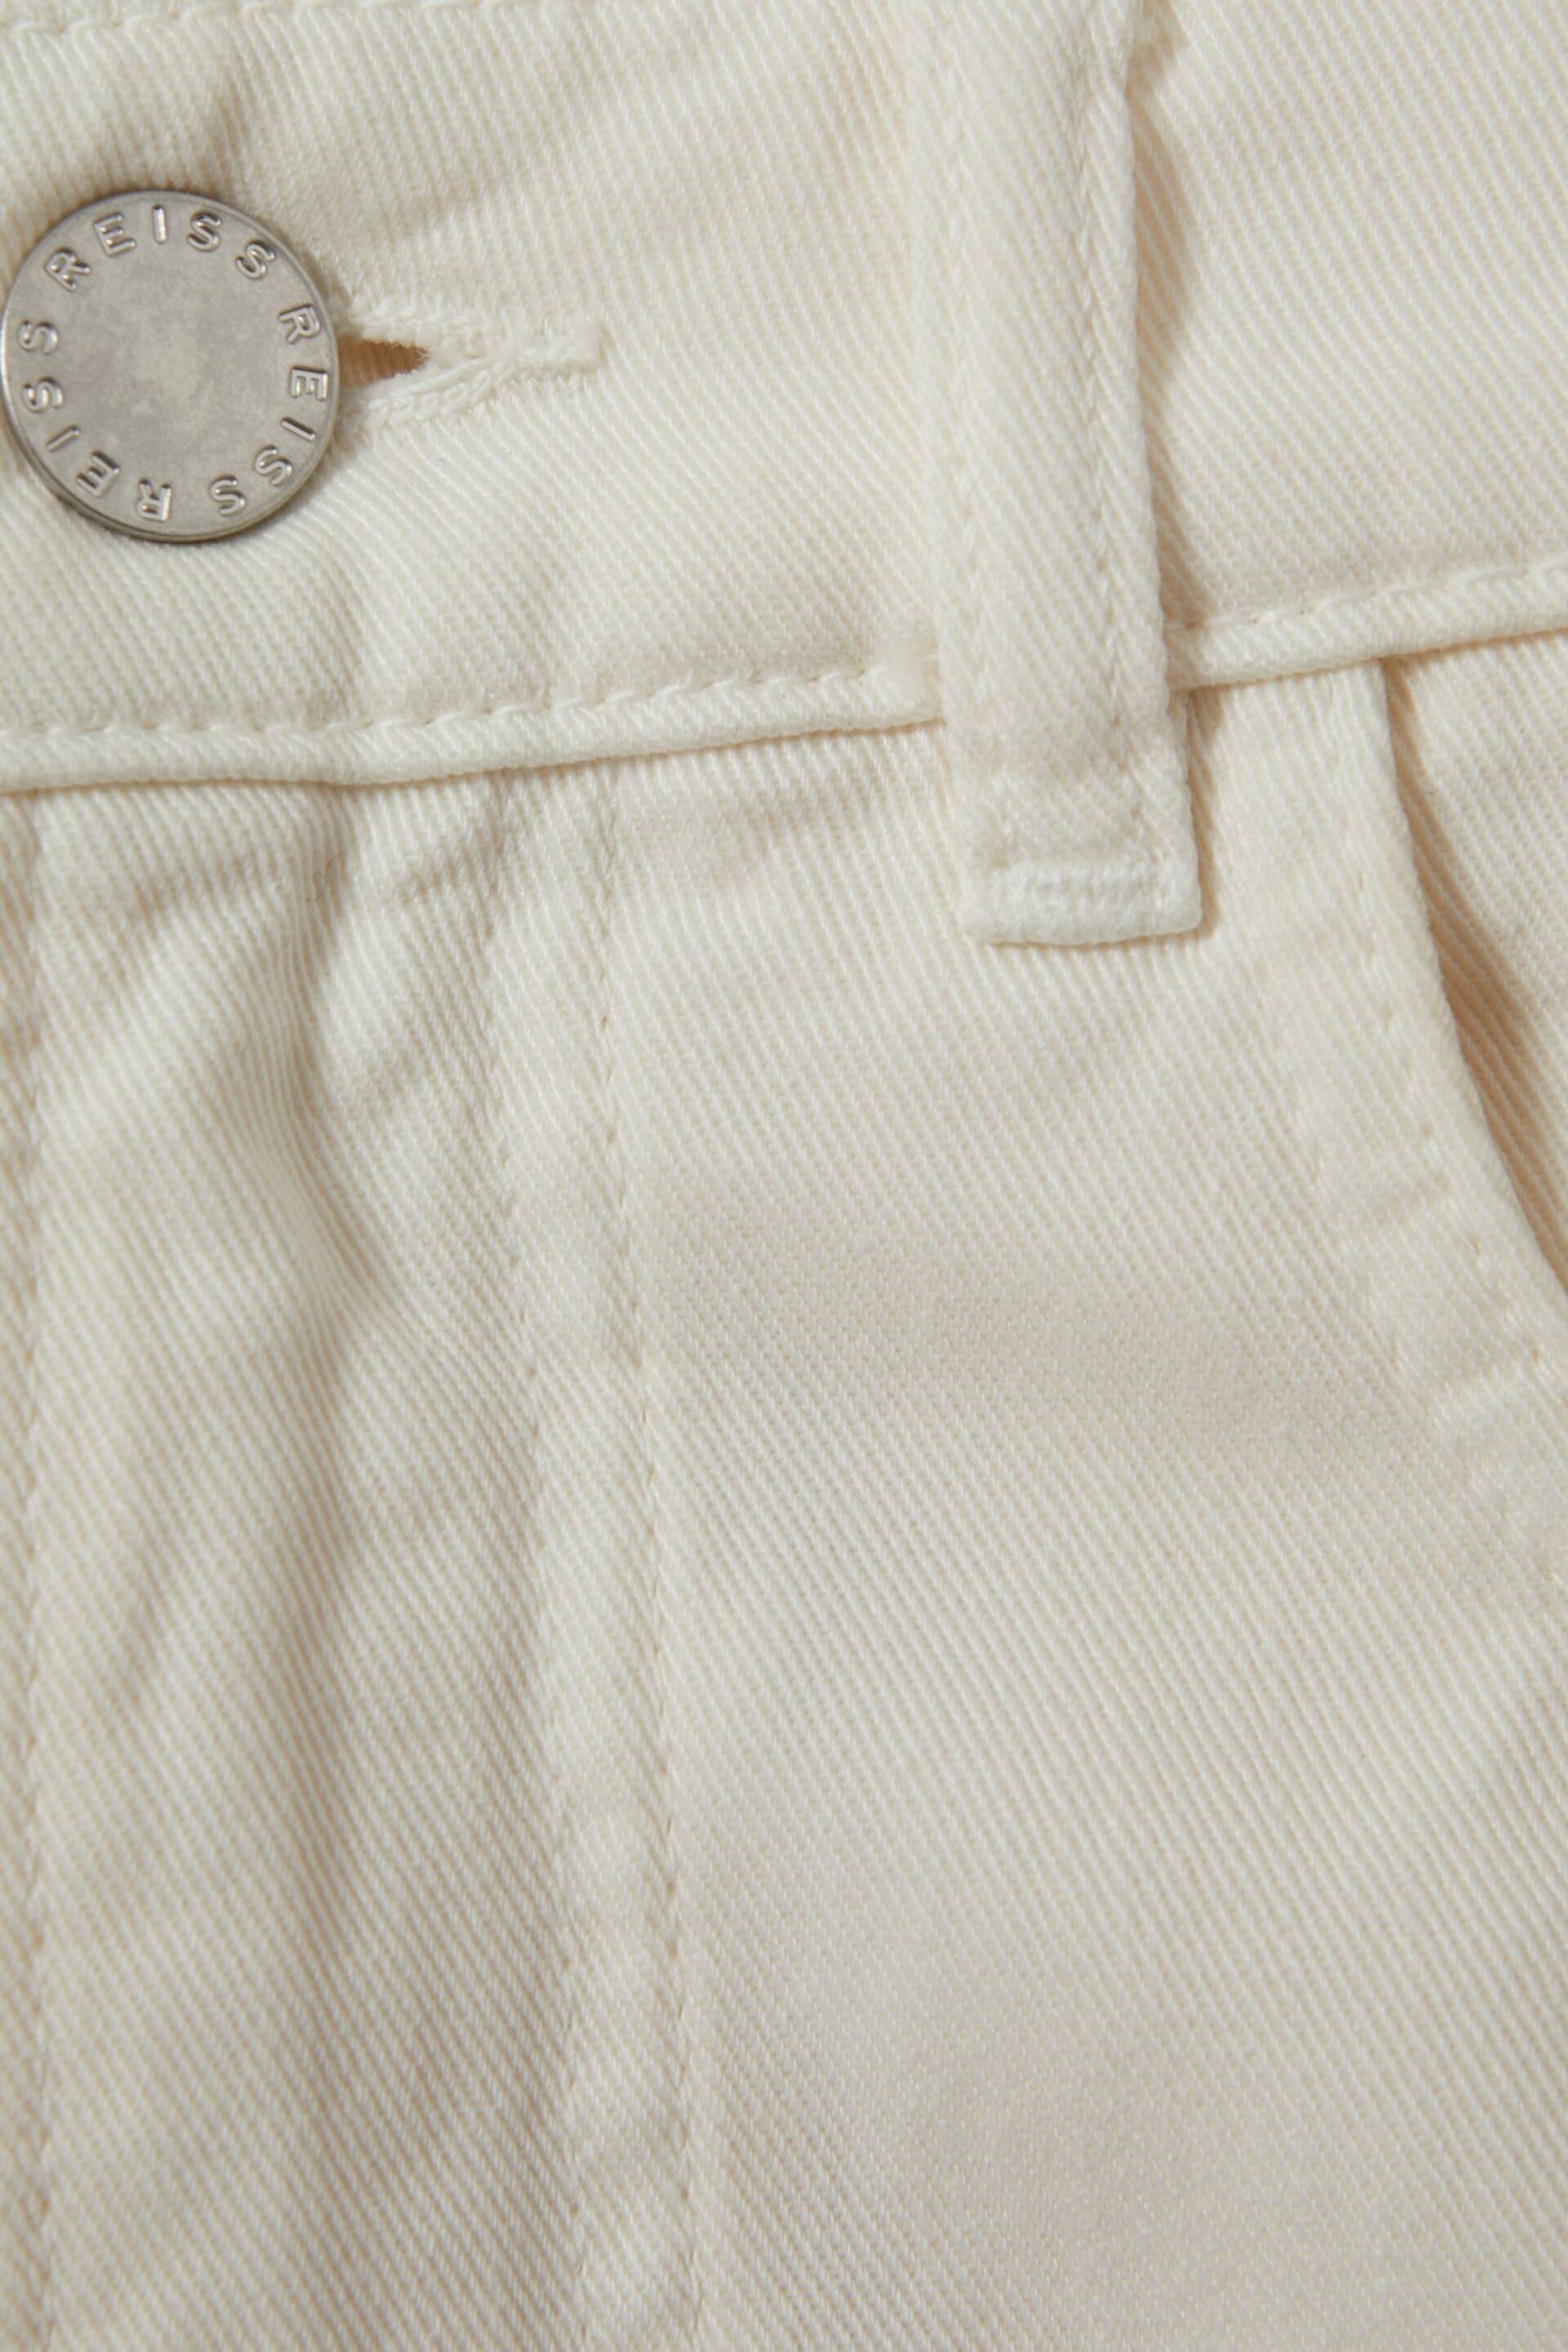 Reiss Cream Colorado Garment Dyed Shorts - Image 6 of 6